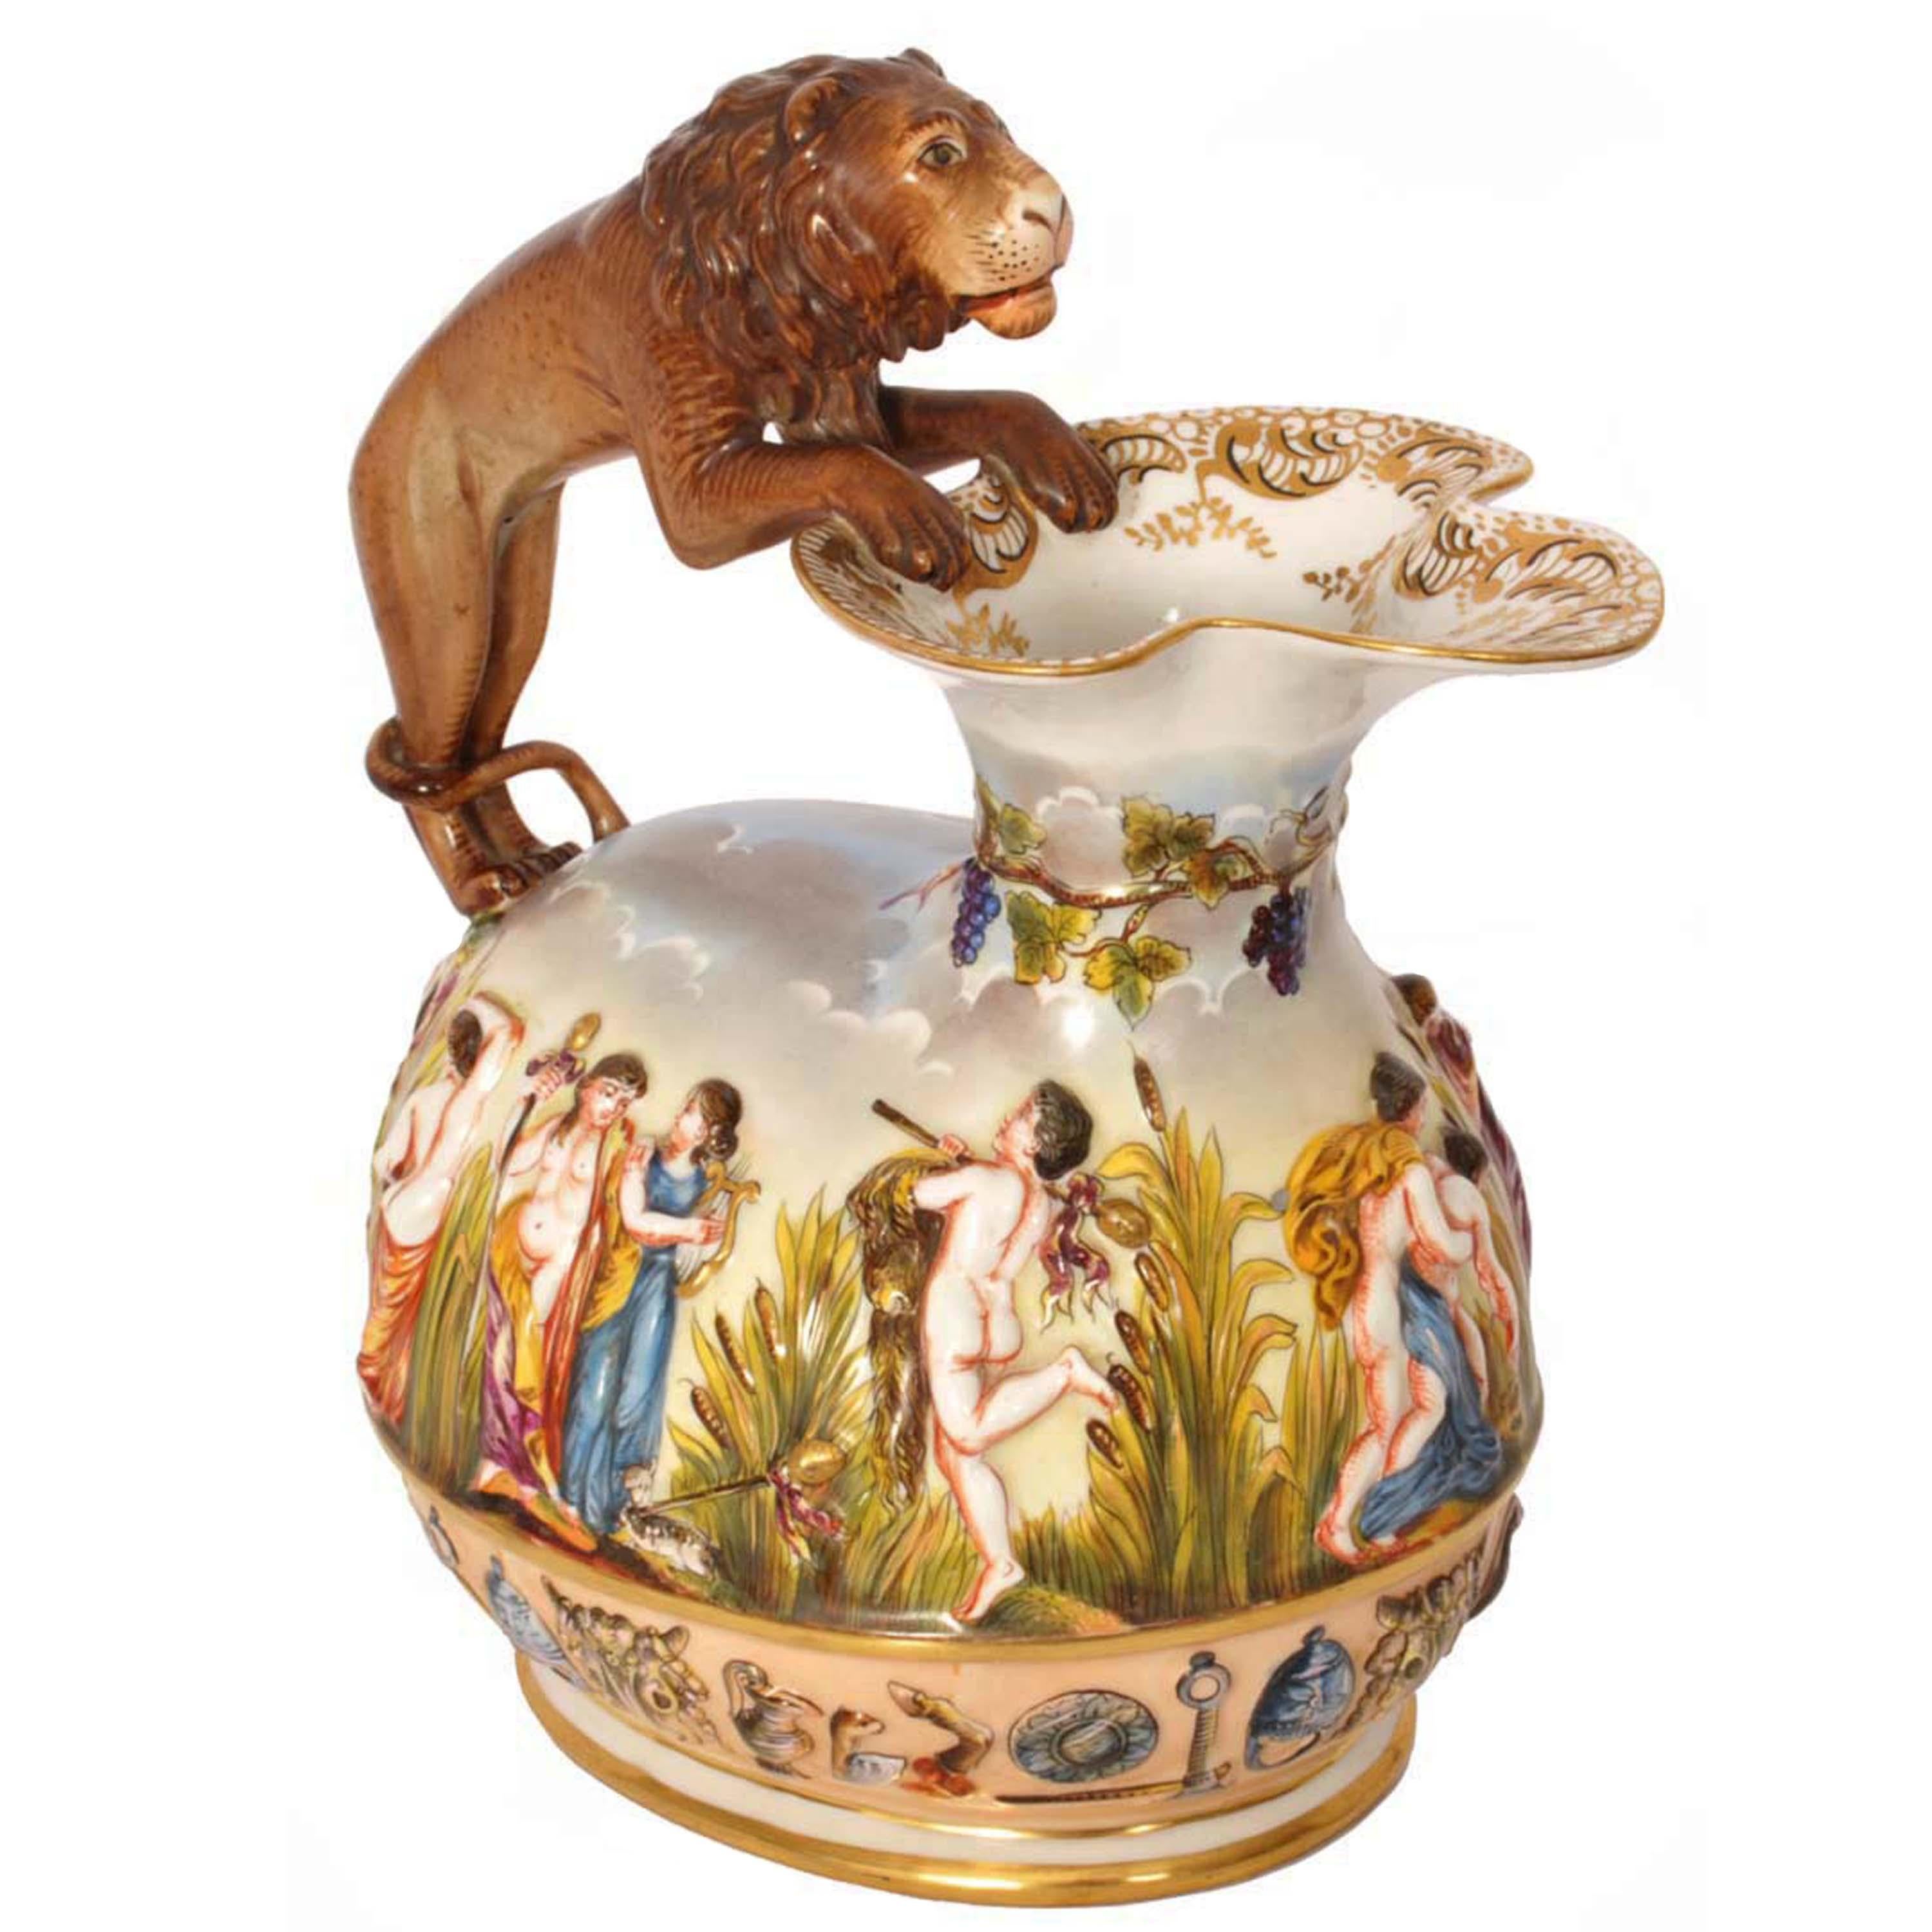 An unusual antique Italian porcelain pitcher jug in the Neoclassical style, Capodimonte, Circa 1880.
The jug modelled with a fabulous lion handle, a pouring spout to the front and decorated with a band of vine and grapes around the neck. The base